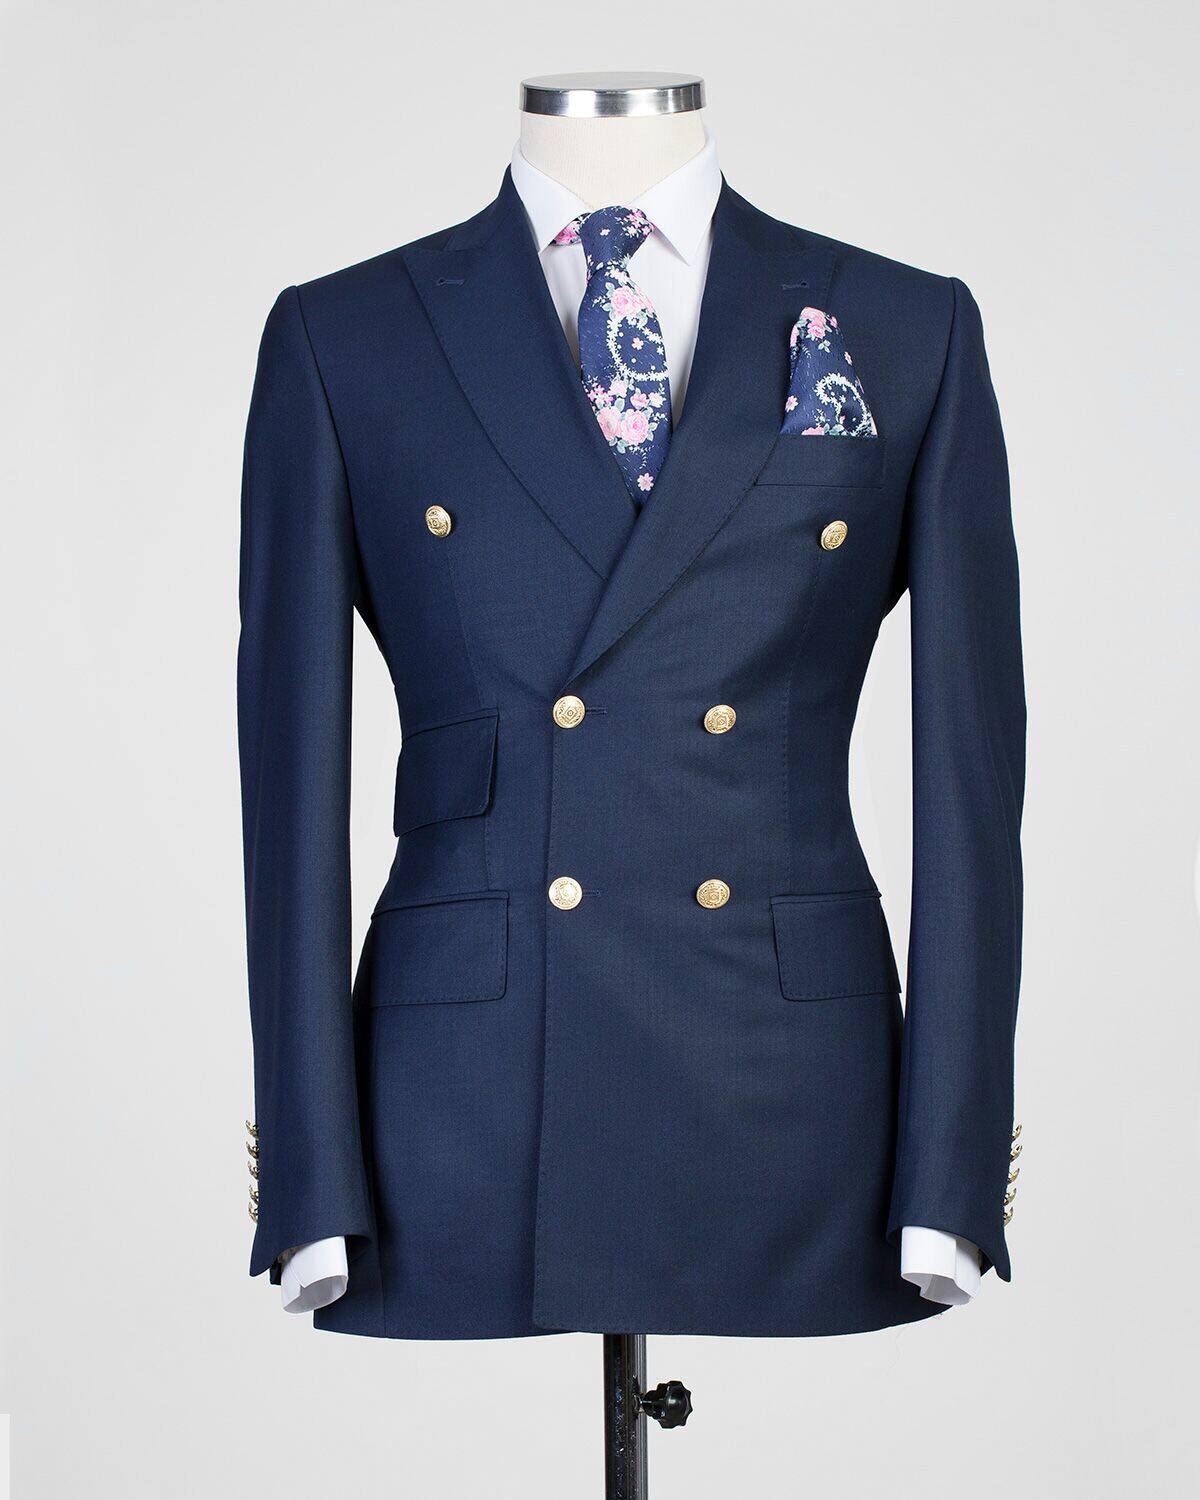 Fashuné Classic Oxford Double Breasted Suit - FASHUNE